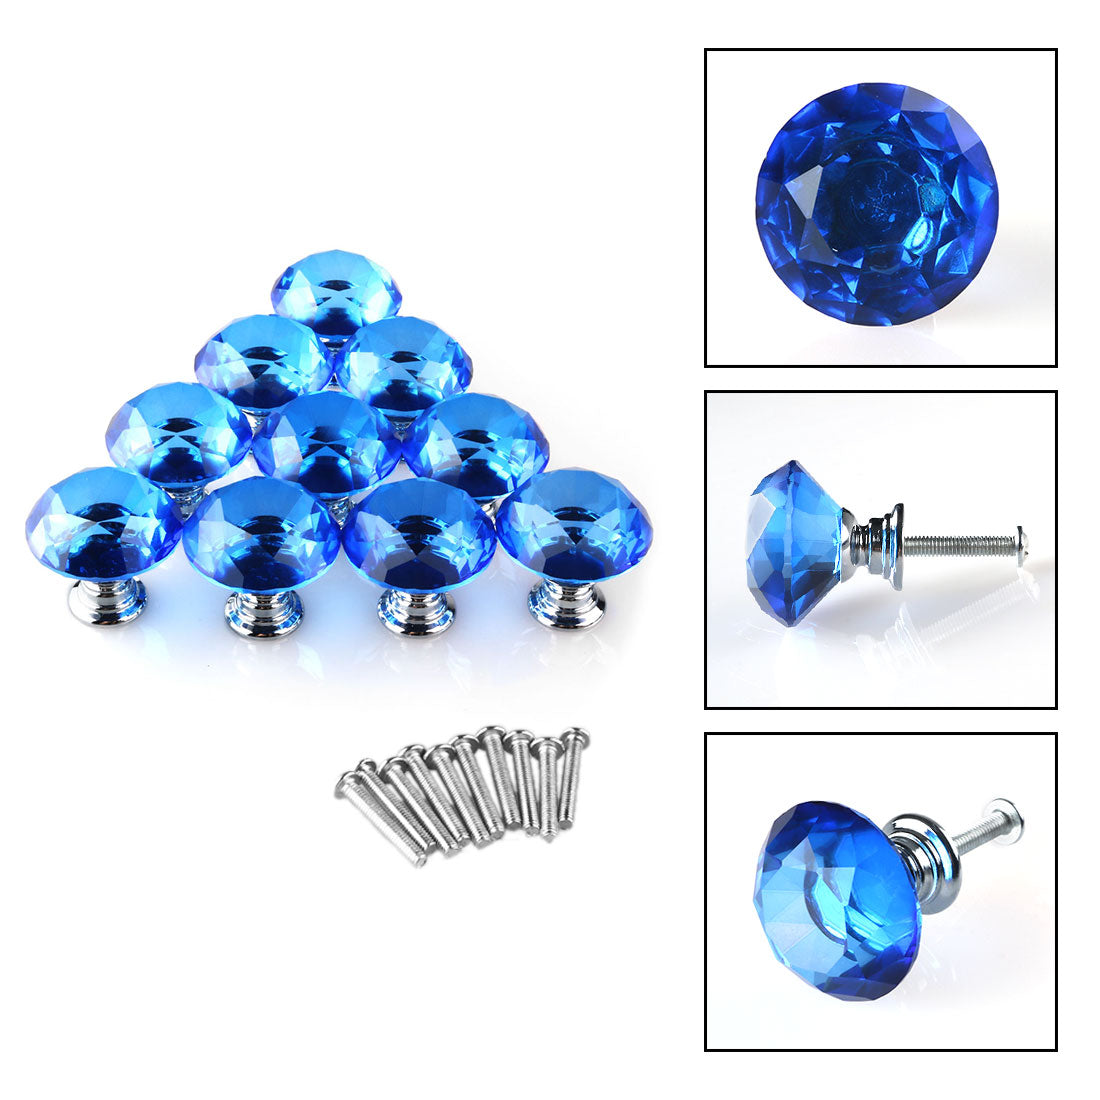 uxcell Uxcell 30mm Crystal Glass Diamond Shape Drawer Knobs Cabinet Pull Handle New Blue 10pcs